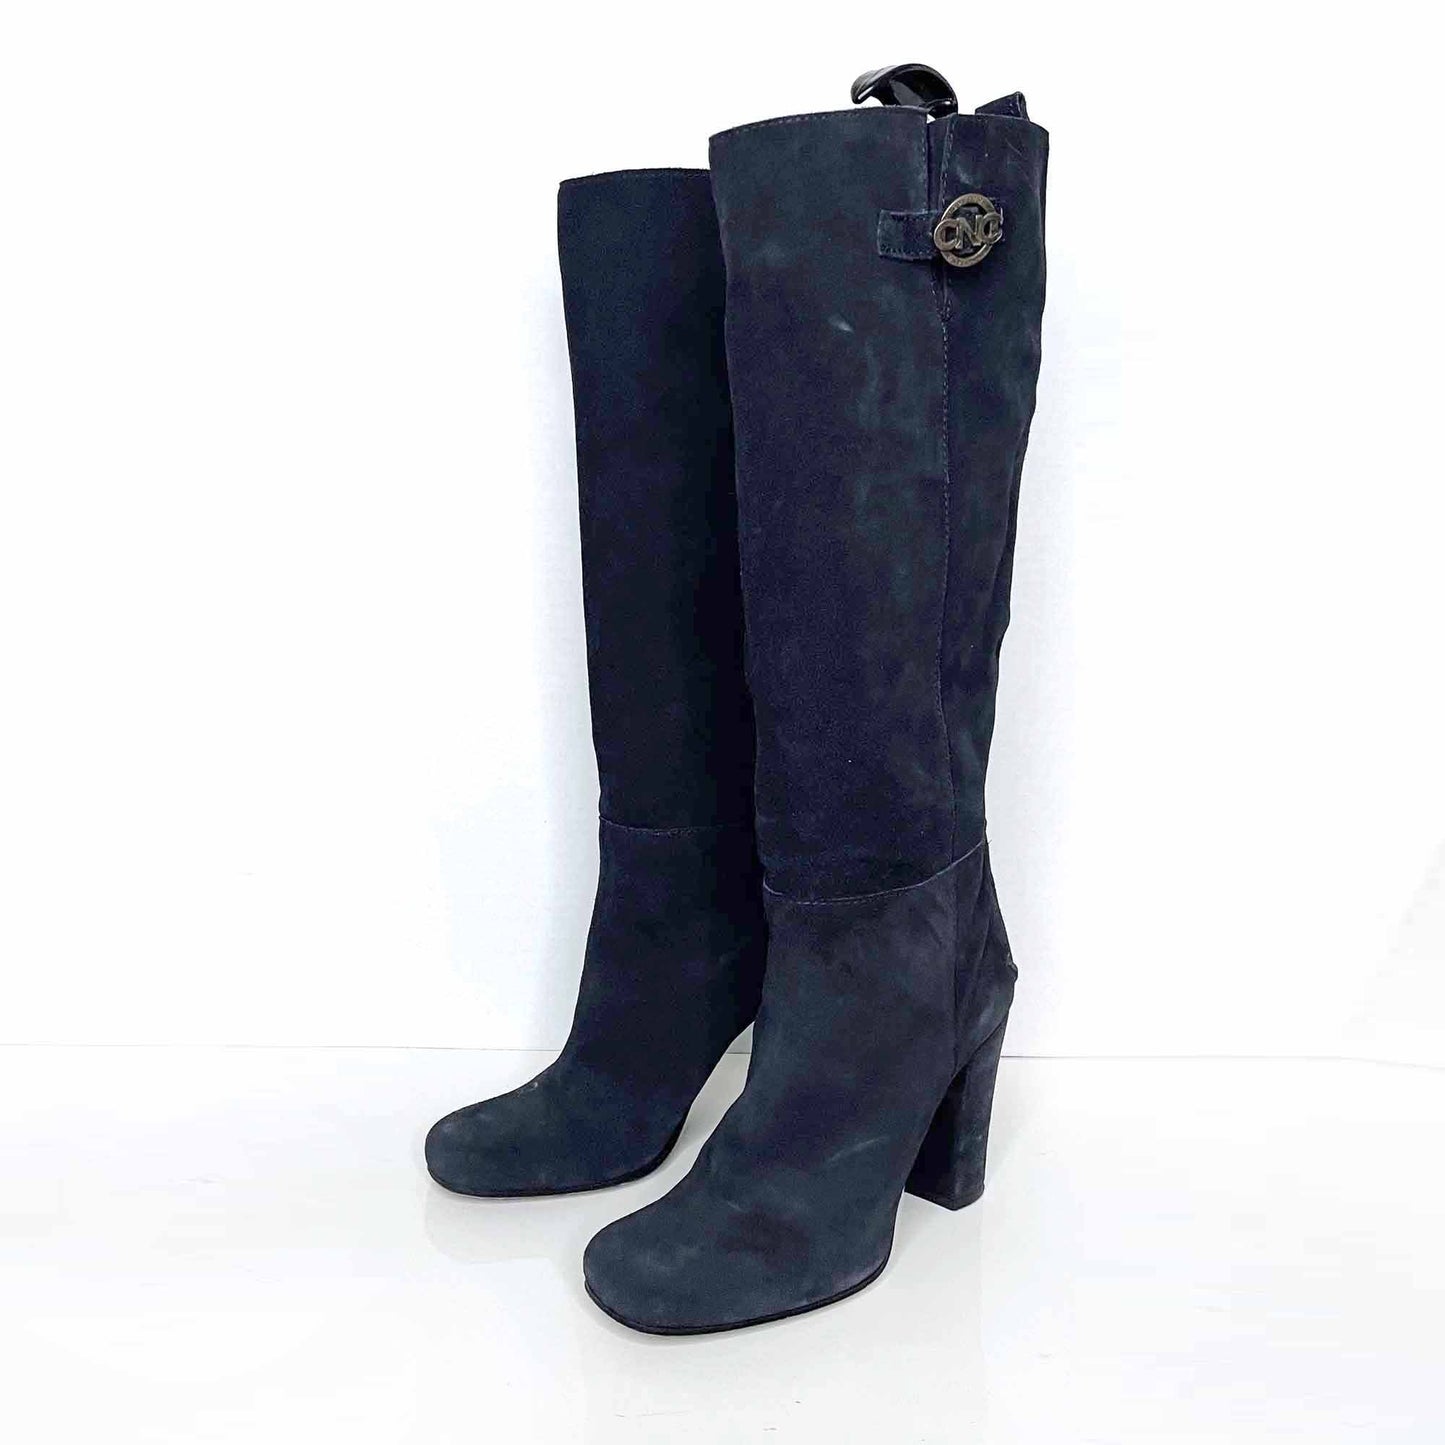 cnc costume national blue suede heeled knee high boots - size 39